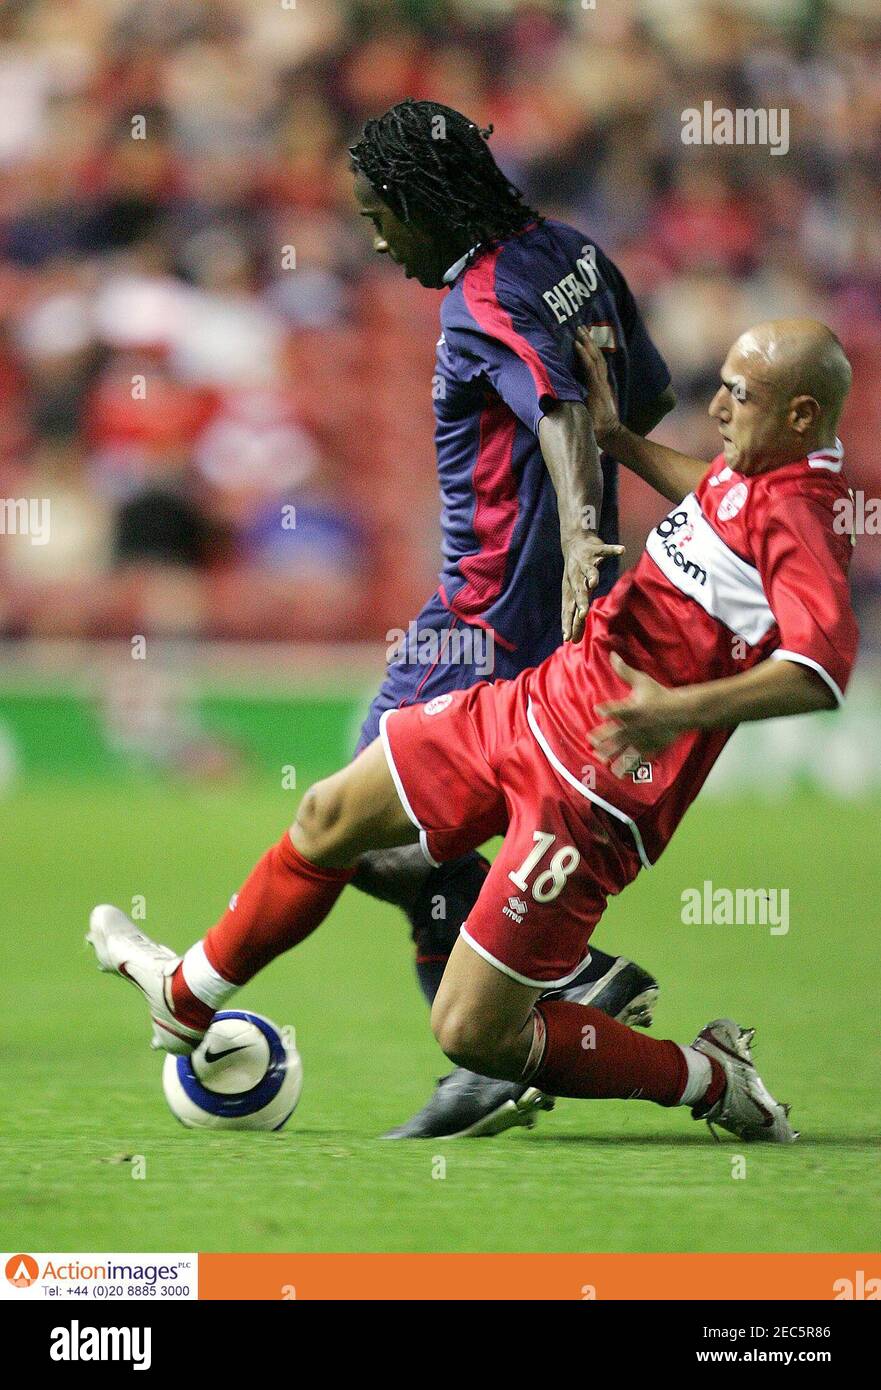 Football - Middlesbrough v FC Xanthi UEFA Cup First Round First Leg - The  Riverside Stadium - 15/9/05 Middlesbrough's Massimo Maccarone challenges FC  Xanthi's Emerson Mandatory Credit: Action Images / Ryan Browne Livepic  Stock Photo - Alamy